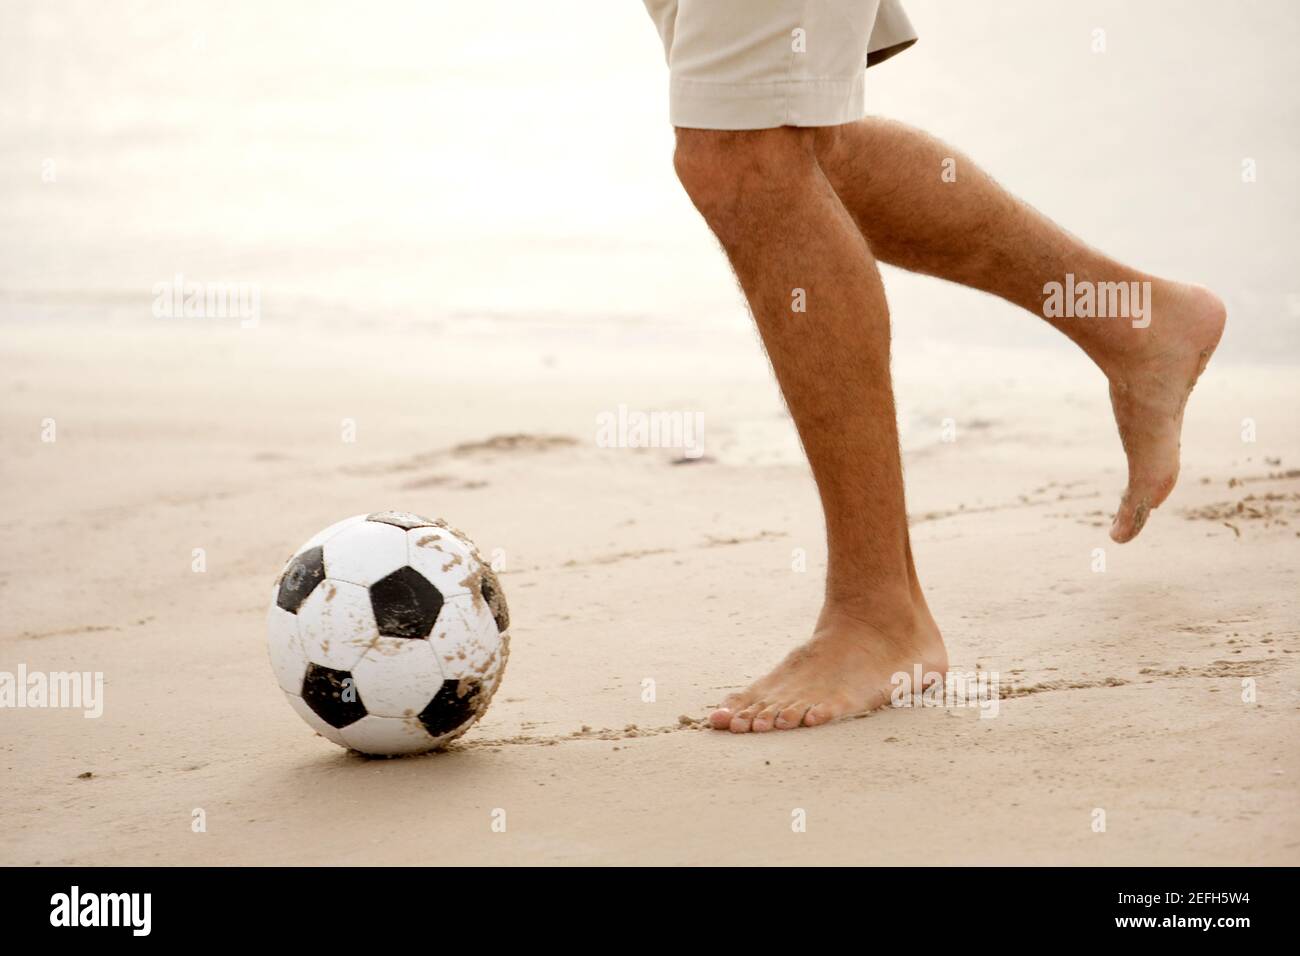 Low section view of a mid adult man playing soccer on the beach Stock Photo